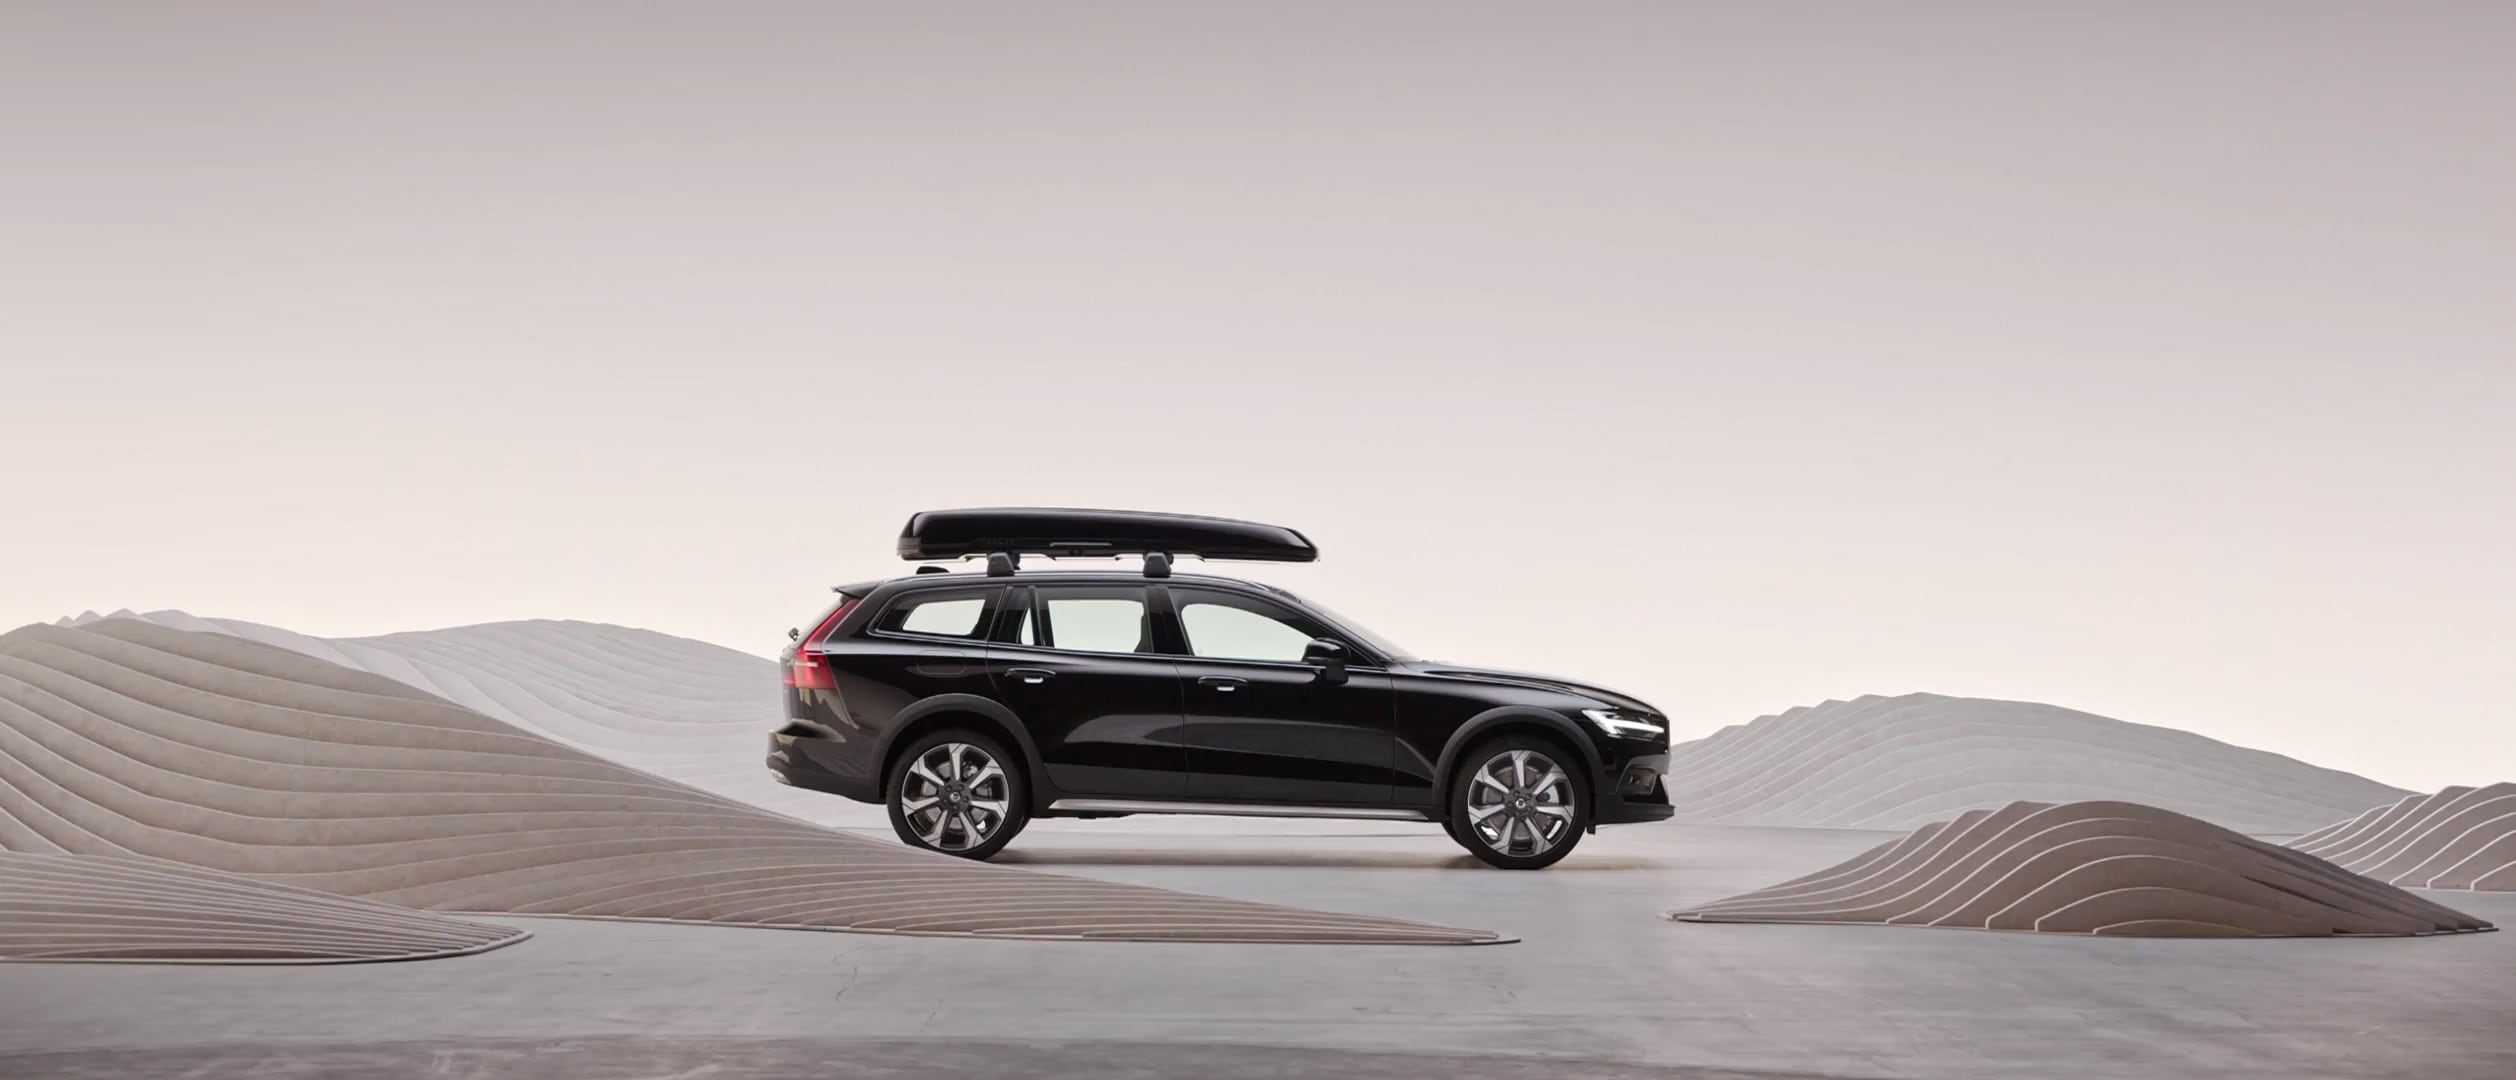 The side profile of a Volvo V60 Cross Country wagon with a roof box.